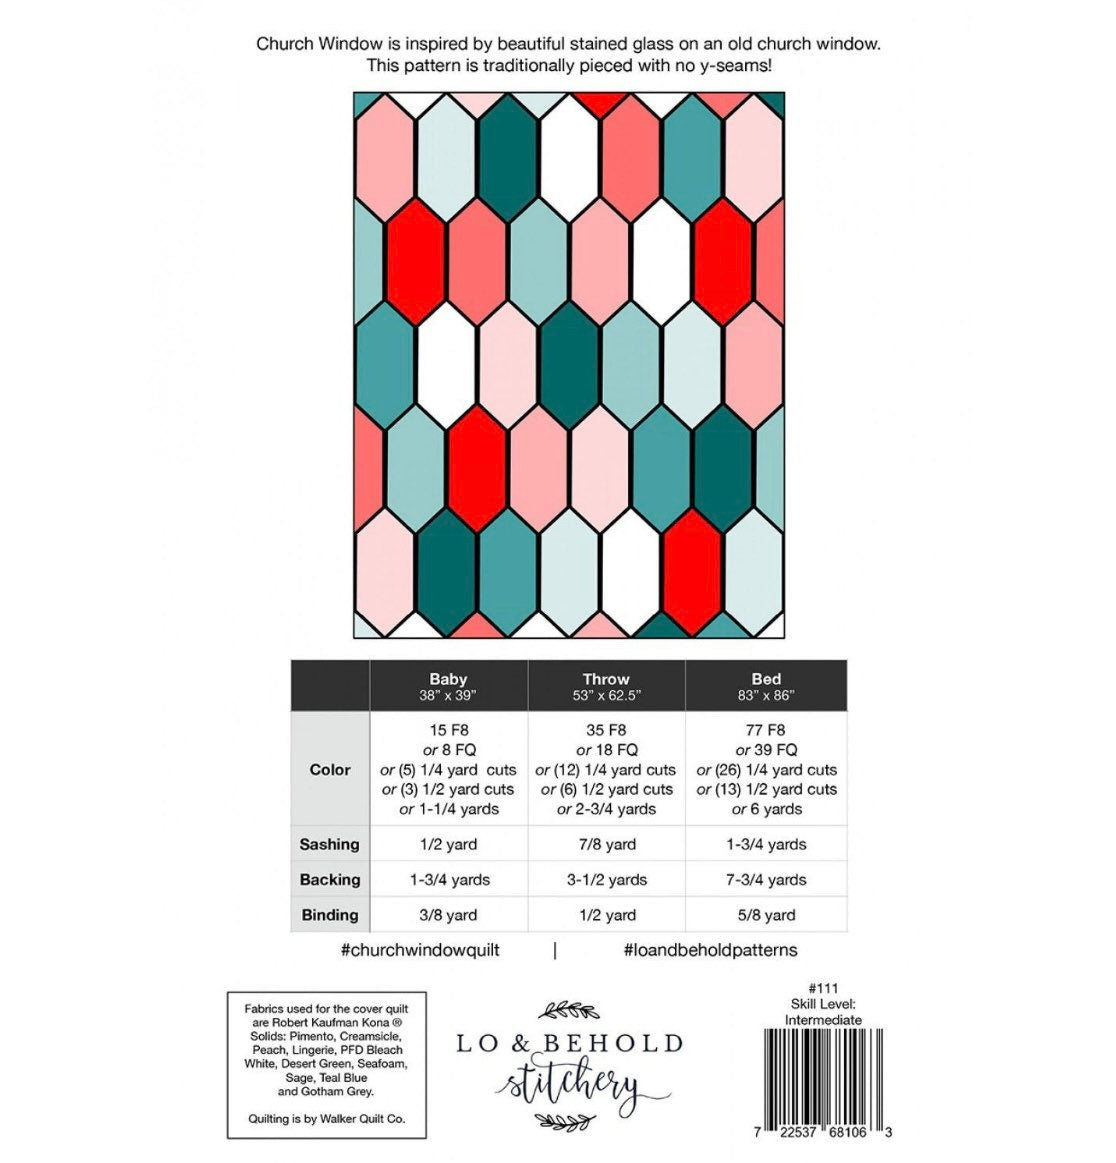 Church Window Quilt Pattern by Brittany Lloyd for Lo & Behold Stitchery (paper copy)